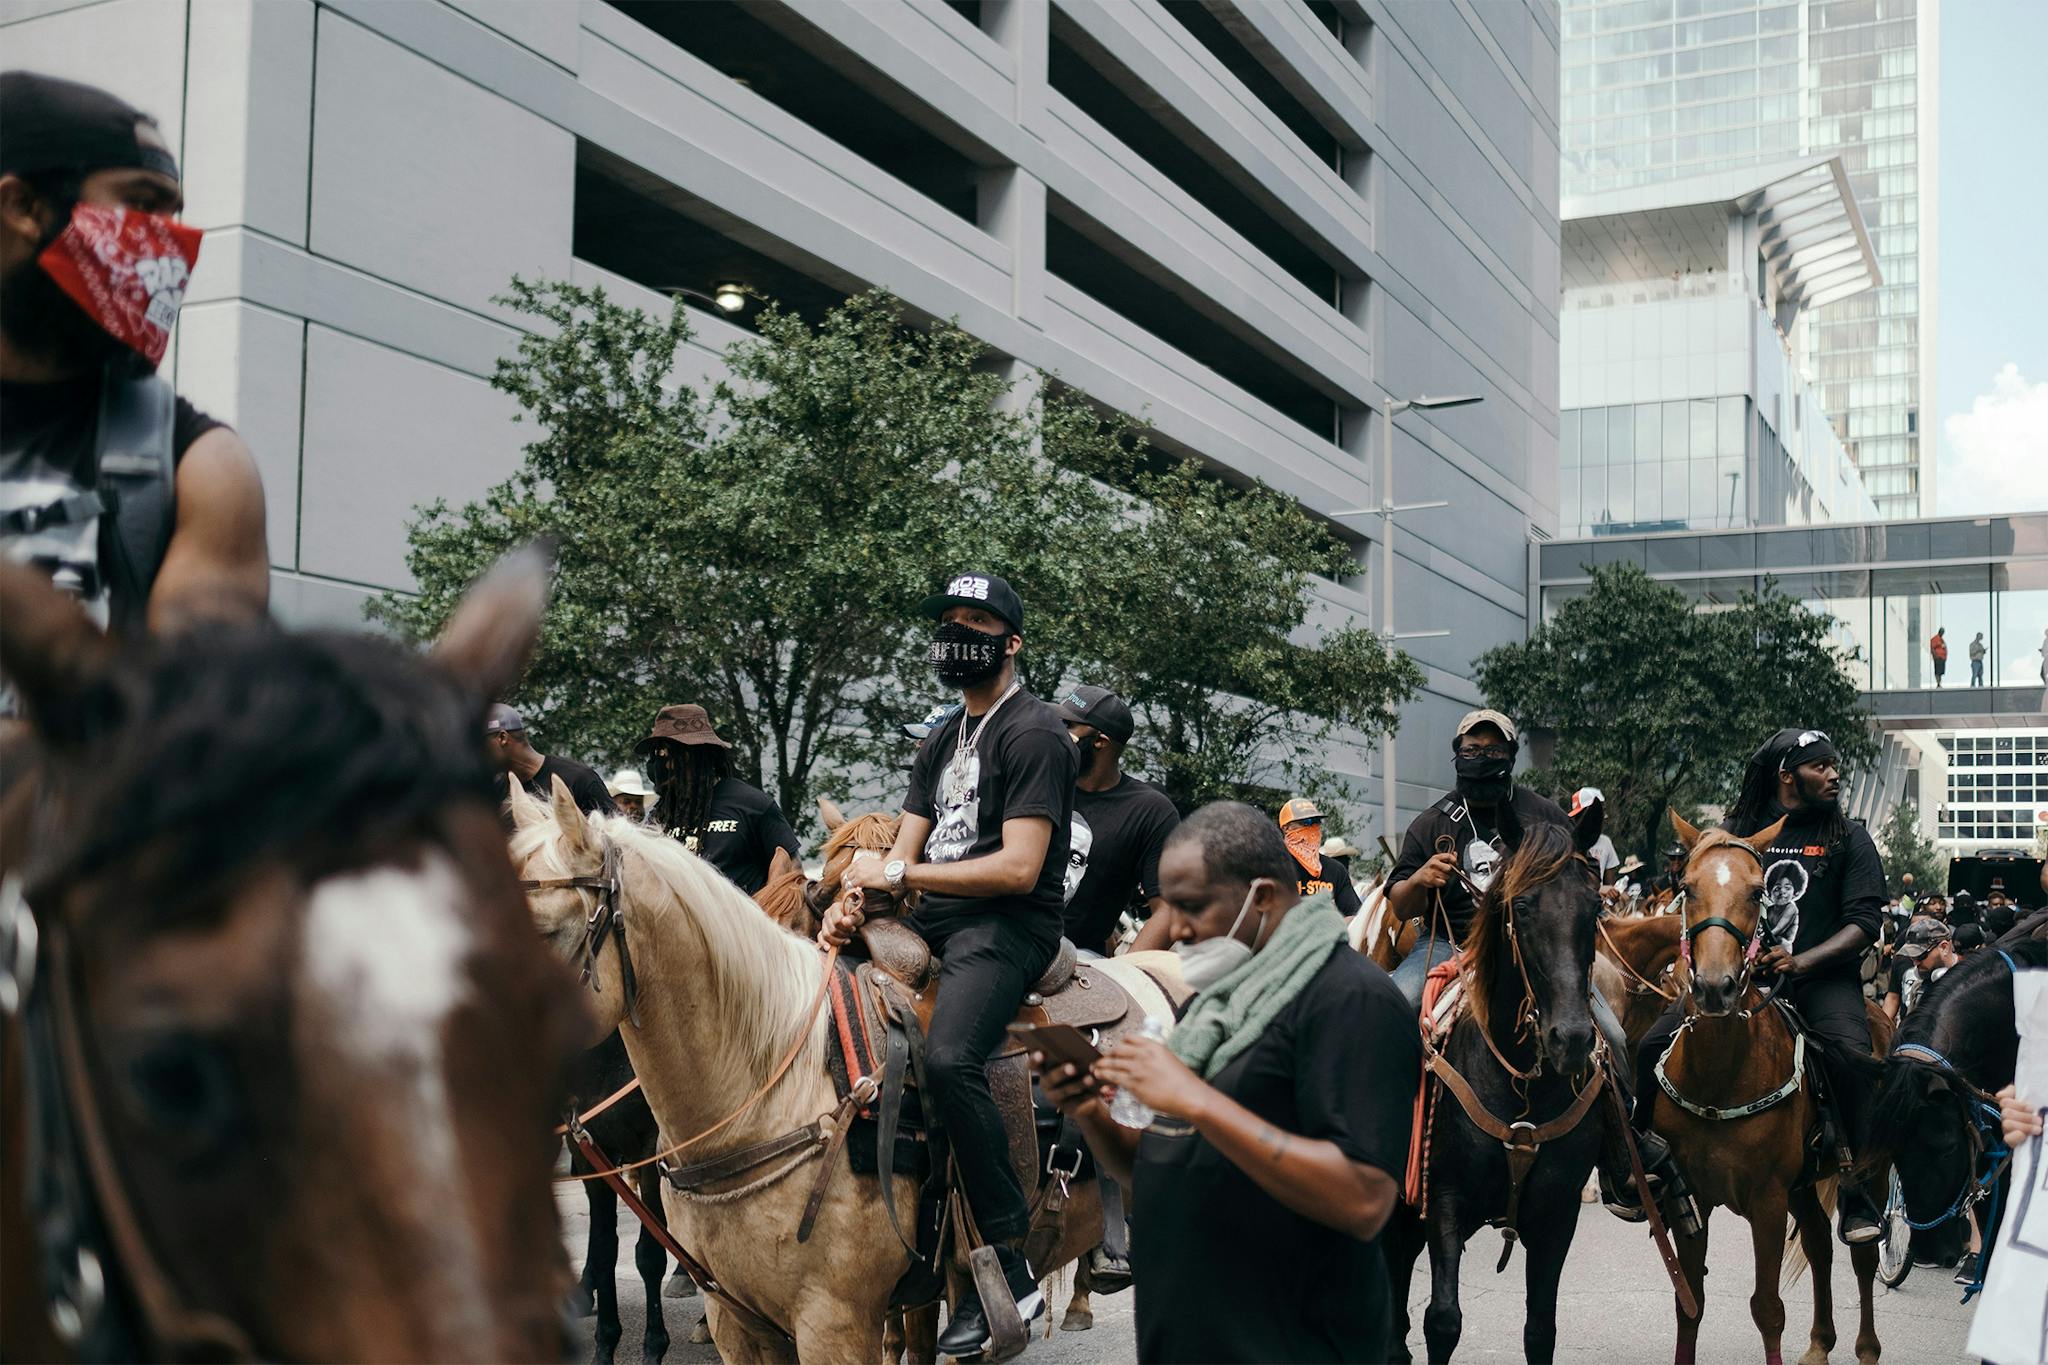 J Prince Jr, center, prepares to ride his horse down Walker street during a march to honor the memory of George Floyd in downtown Houston on June 2, 2020.